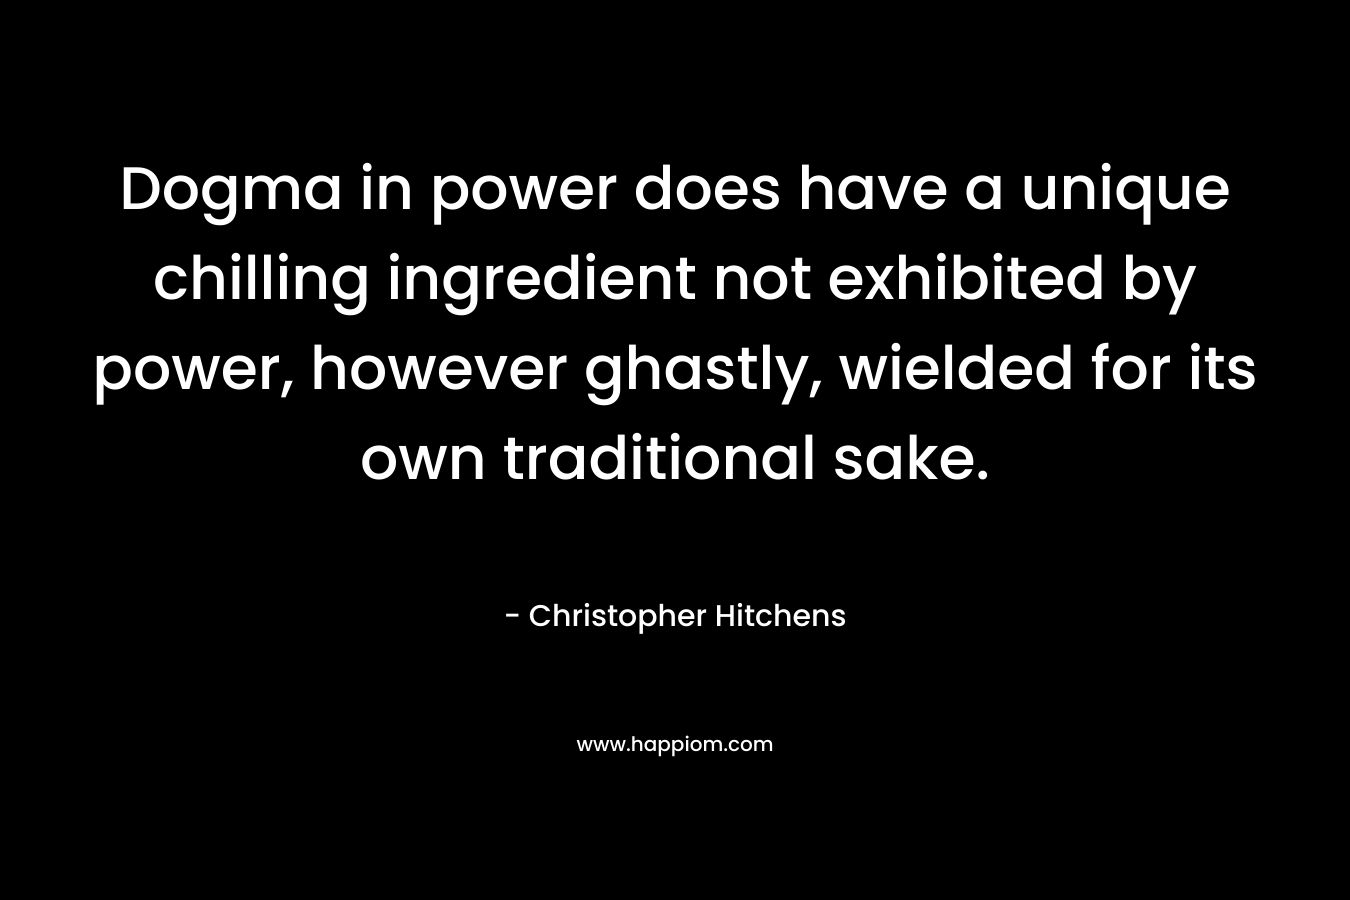 Dogma in power does have a unique chilling ingredient not exhibited by power, however ghastly, wielded for its own traditional sake. – Christopher Hitchens